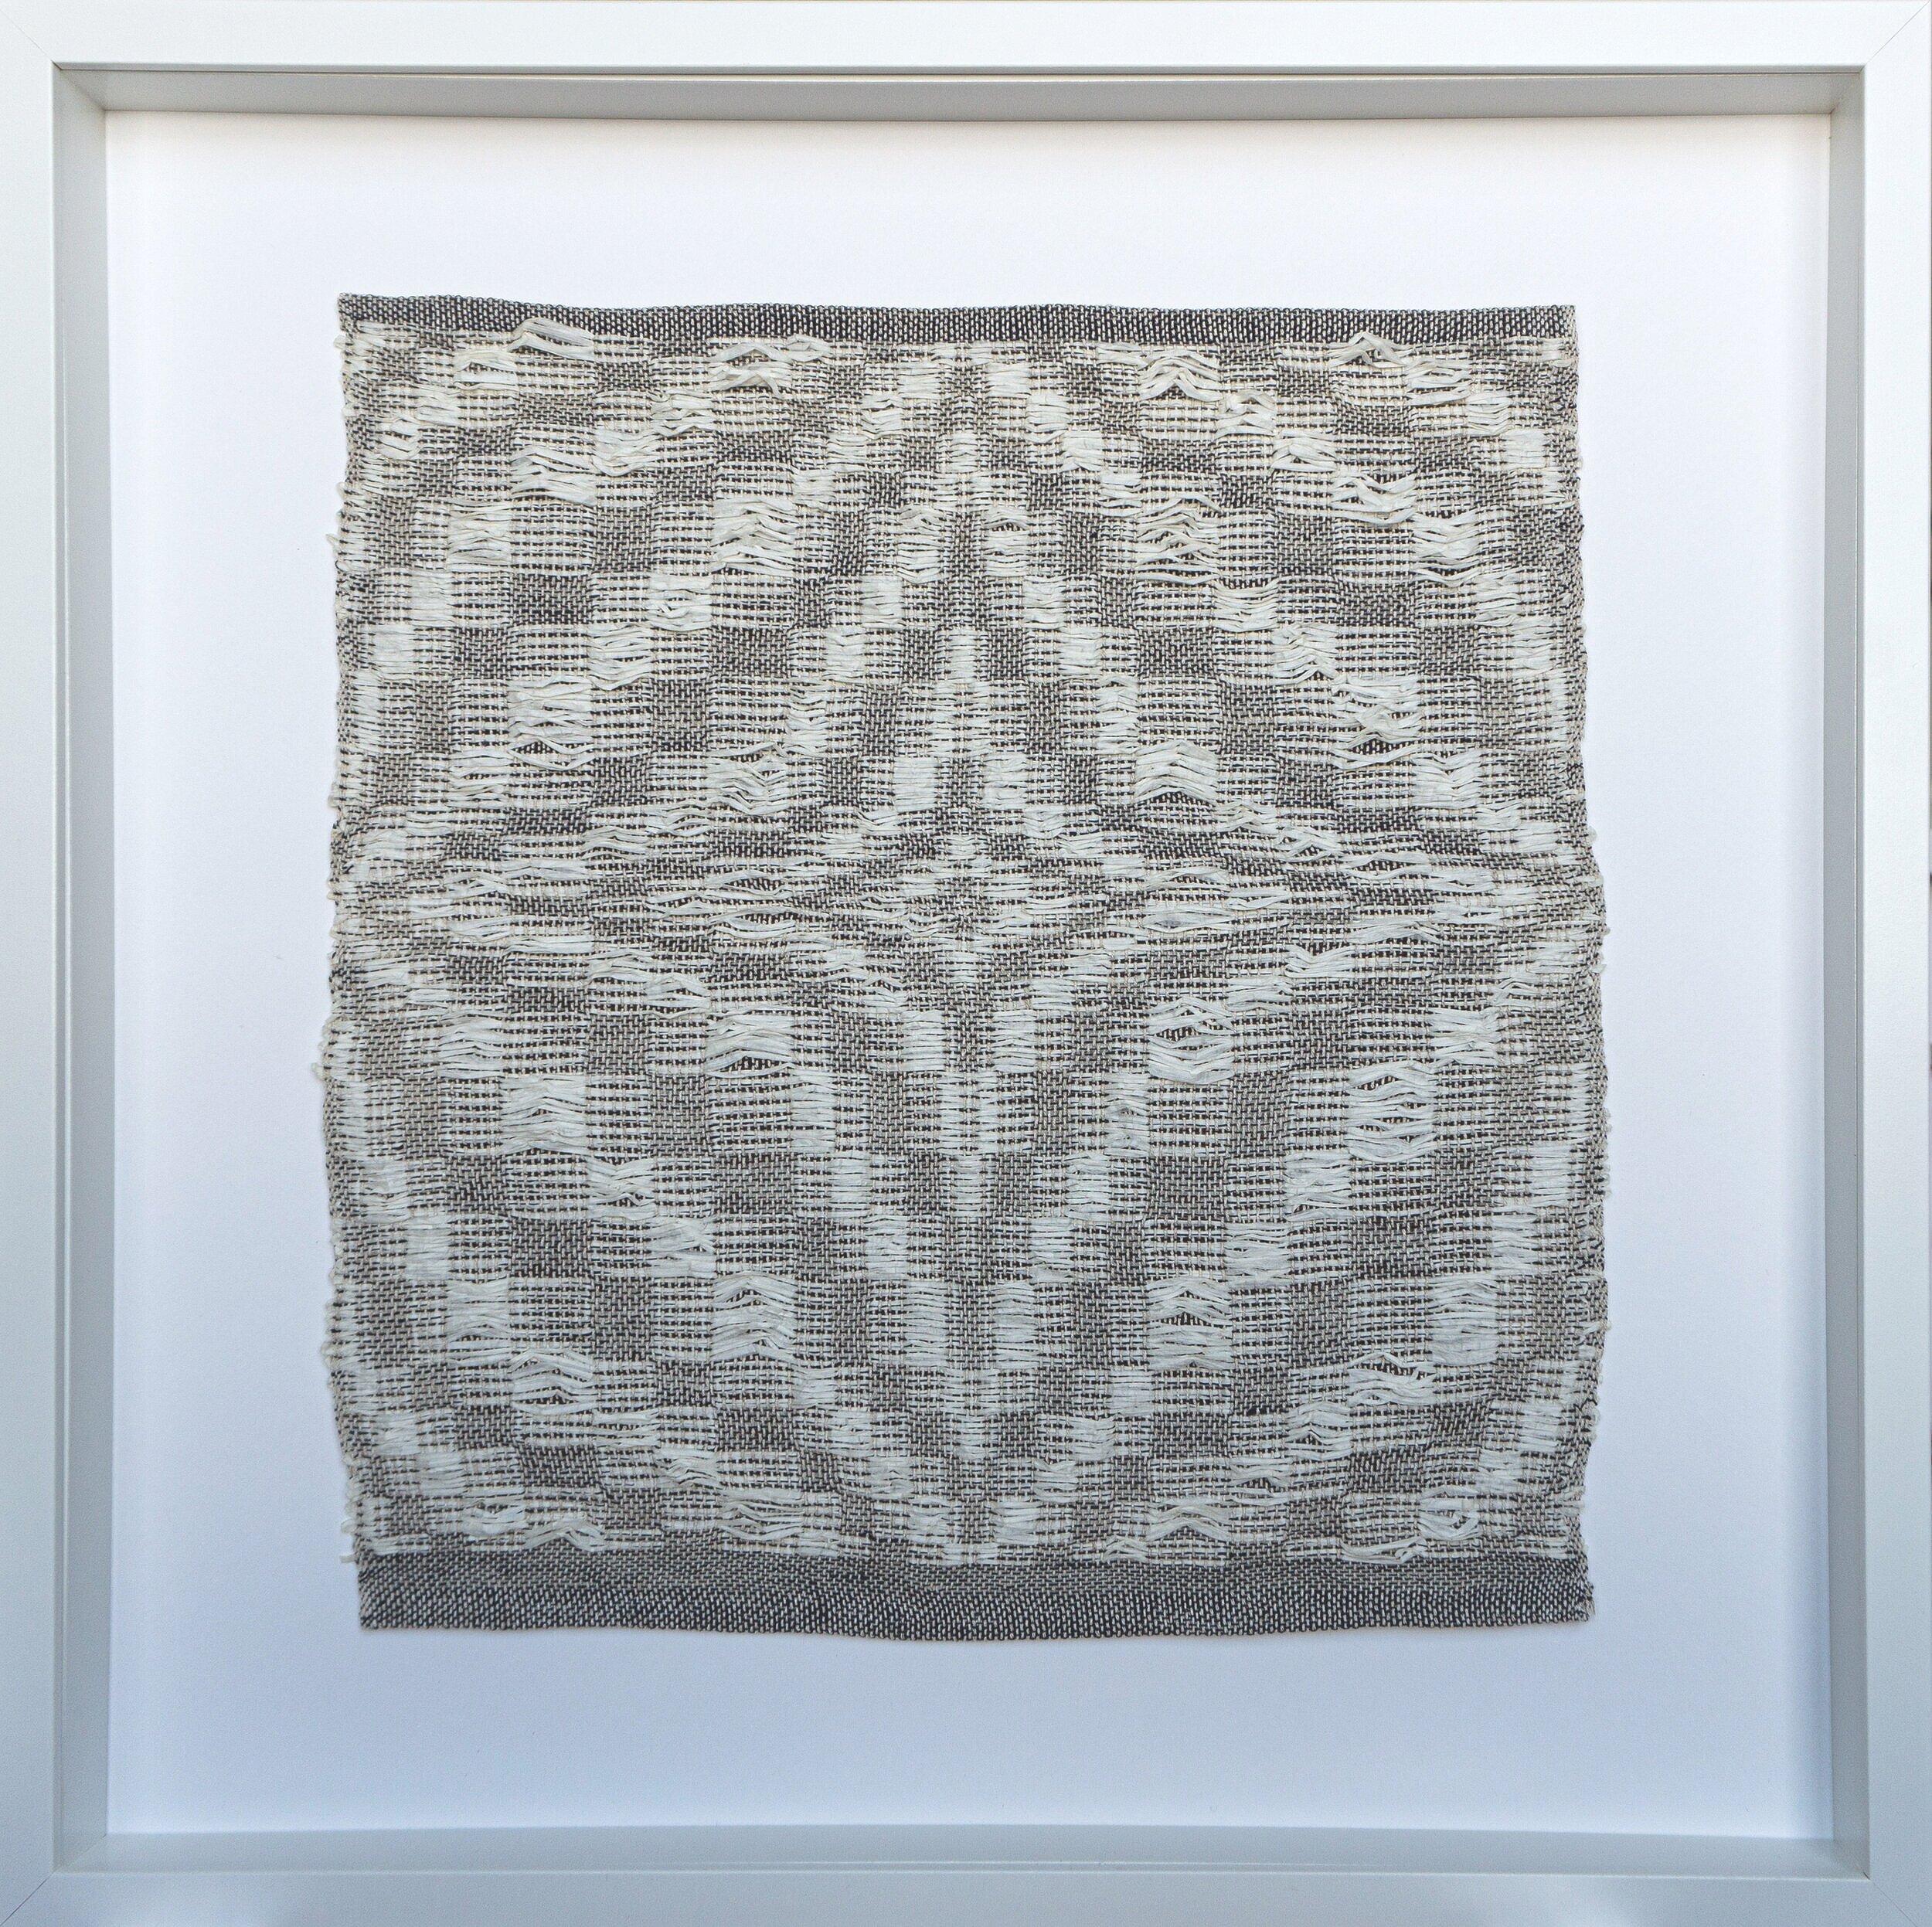 Vortex, 2020, Paper linen and stainless steel, 13" x 14"